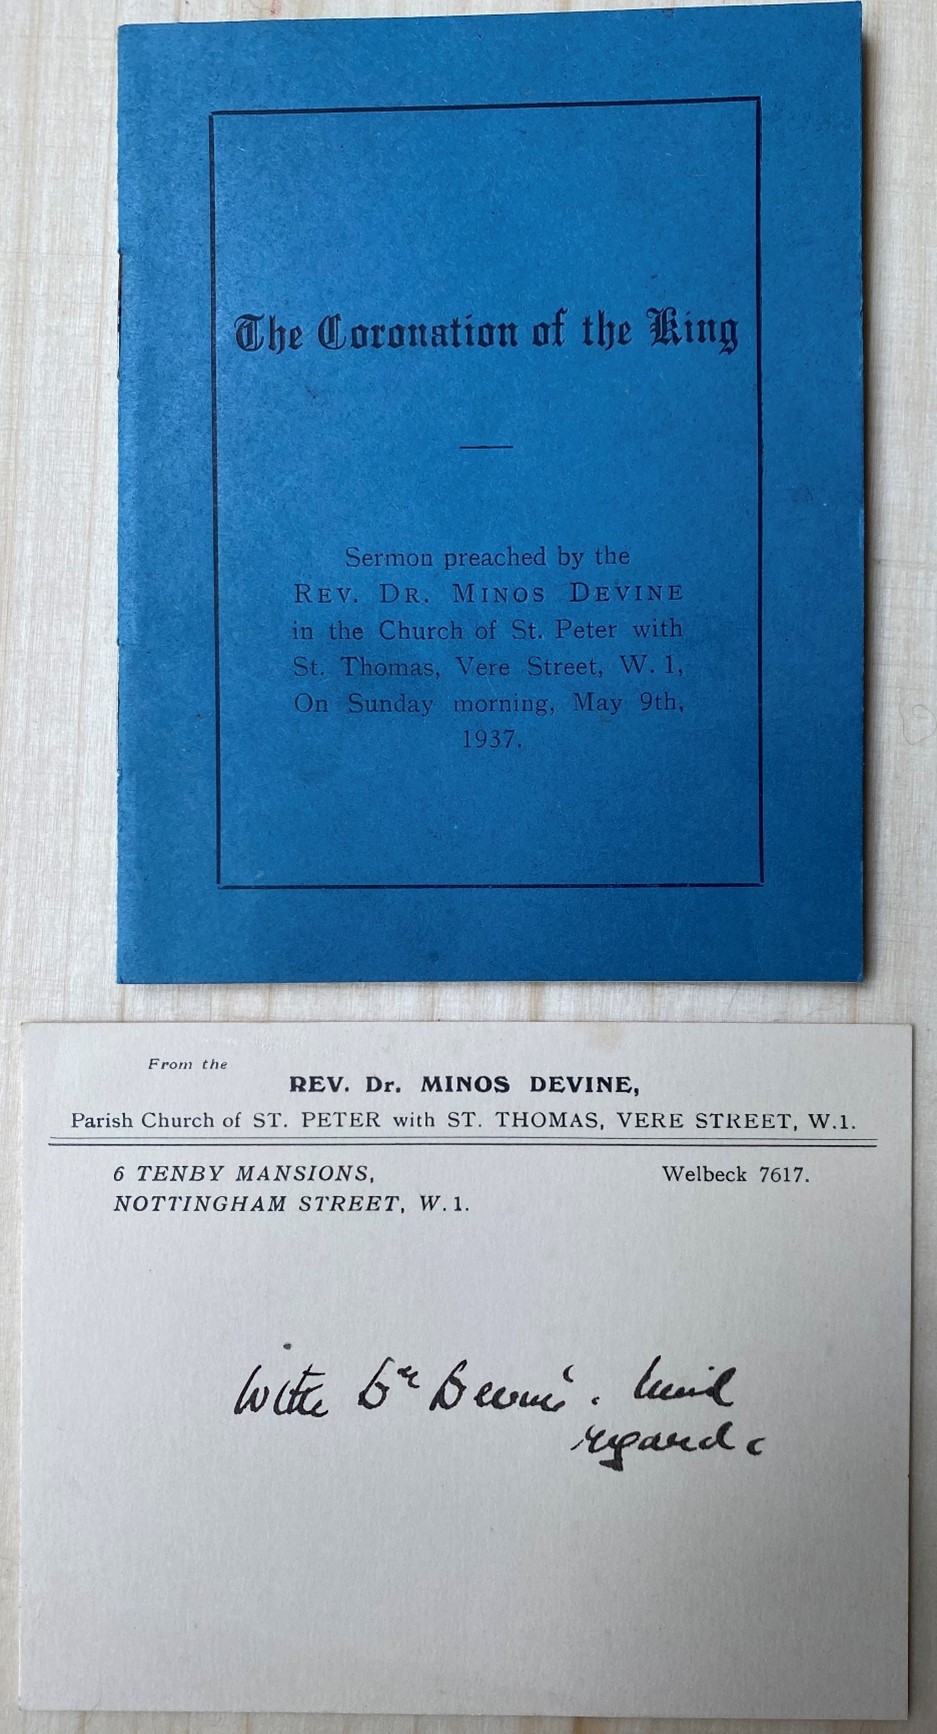 A blue pamphlet with the title 'The Coronation of the King: Sermon preached by the REV. DR. Mions Devine in the Church of St. Peter with St. Thomas, Vere Street, W.1., on Sunday Morning May 9th, 1937.' Underneath the pamphlet is a card from Minos Devine, however his handwriting is very hard to read. 